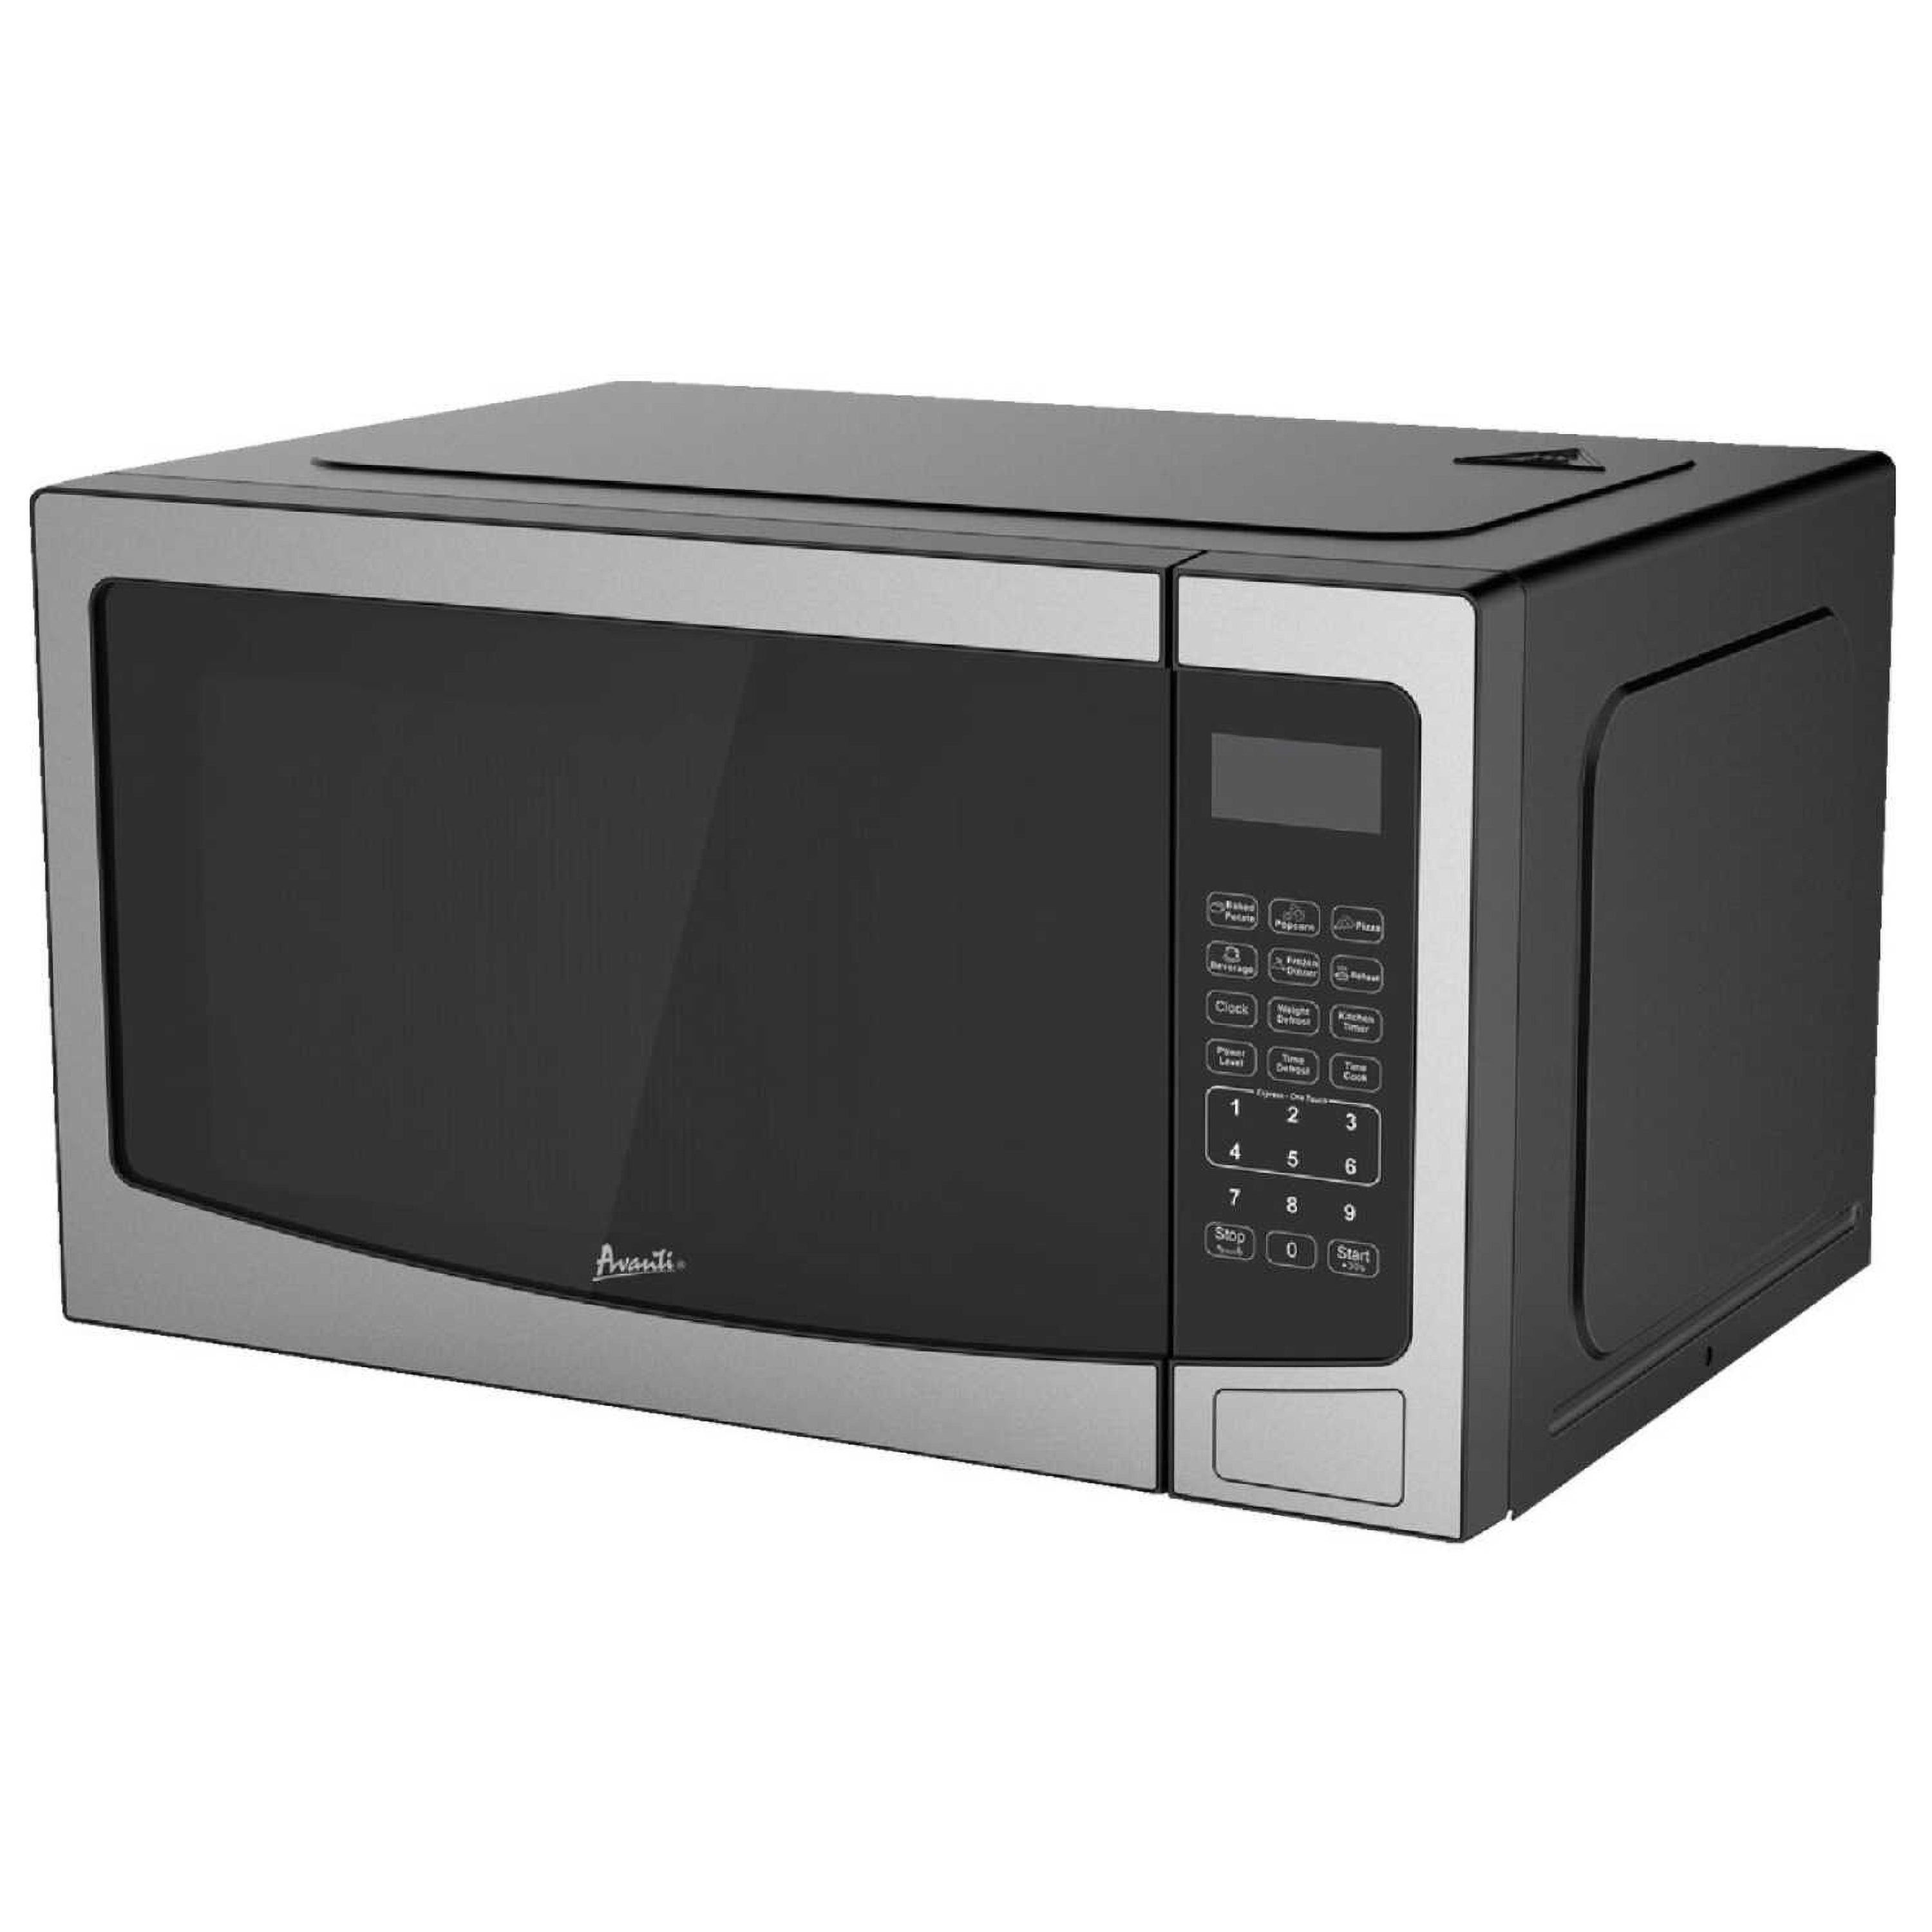 1.1 Cubic Foot 1000W Microwave Oven Stainless